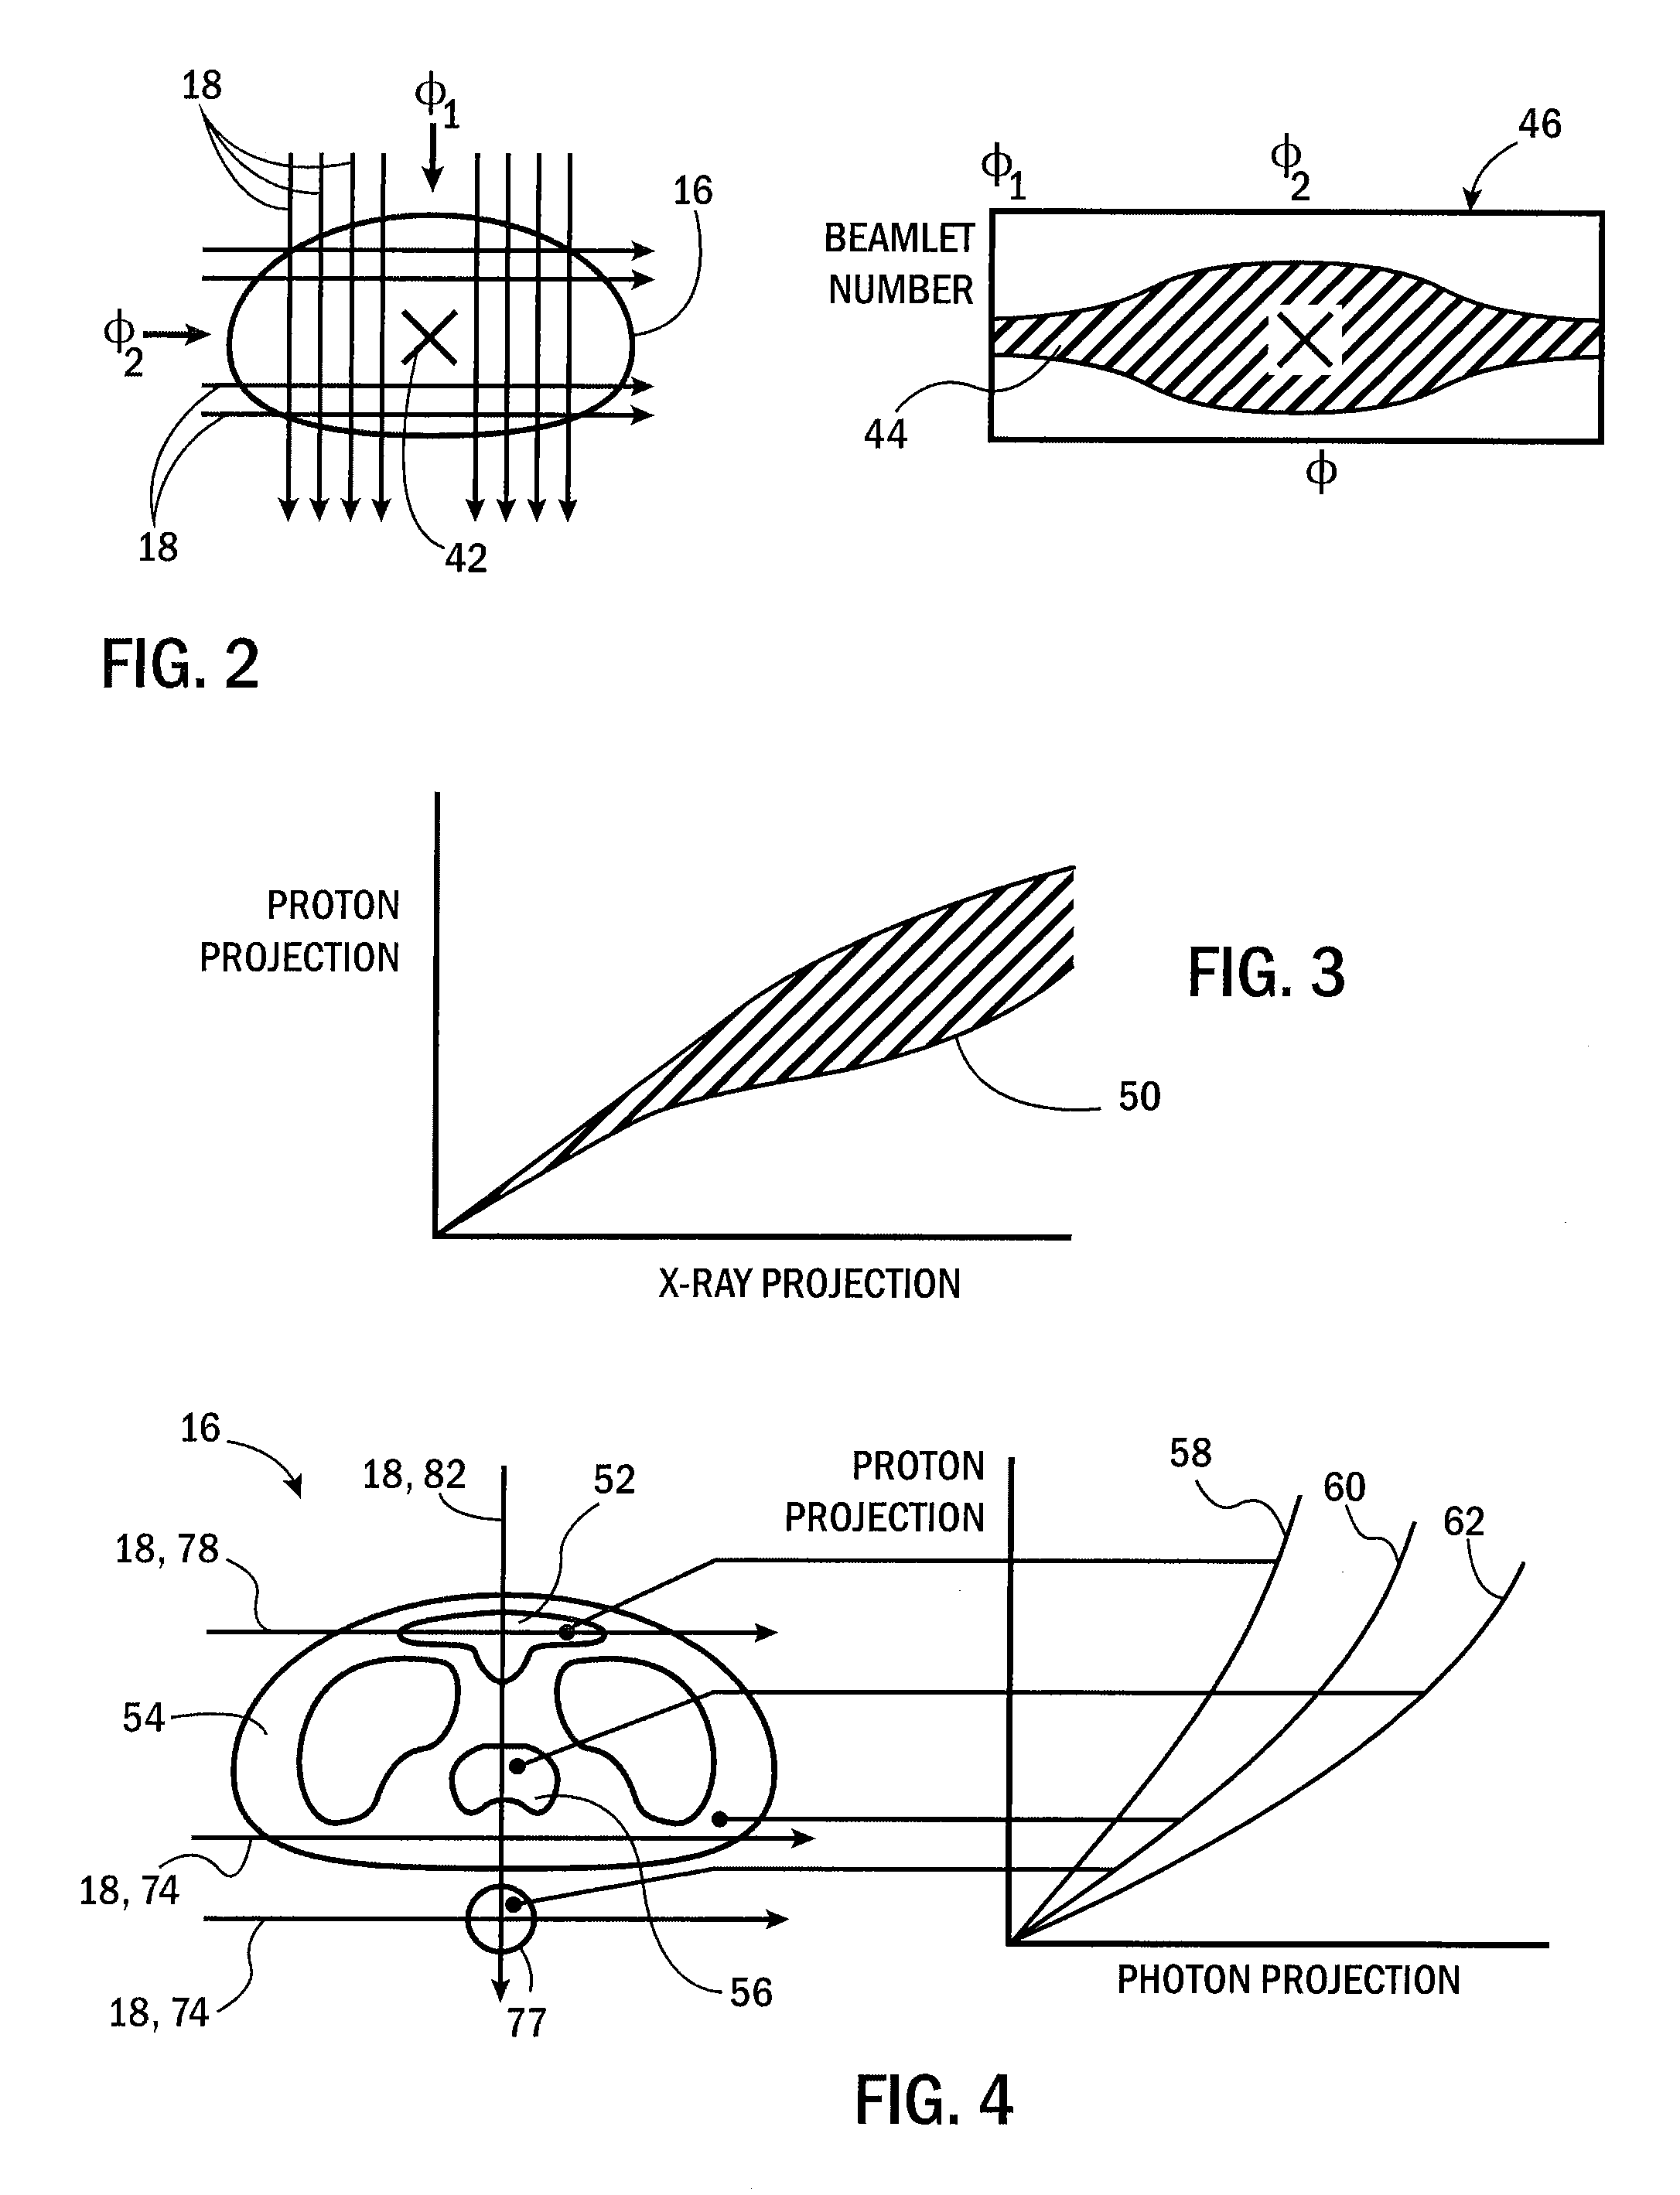 Method and Apparatus for Generating Proton Therapy Treatment Planning Images